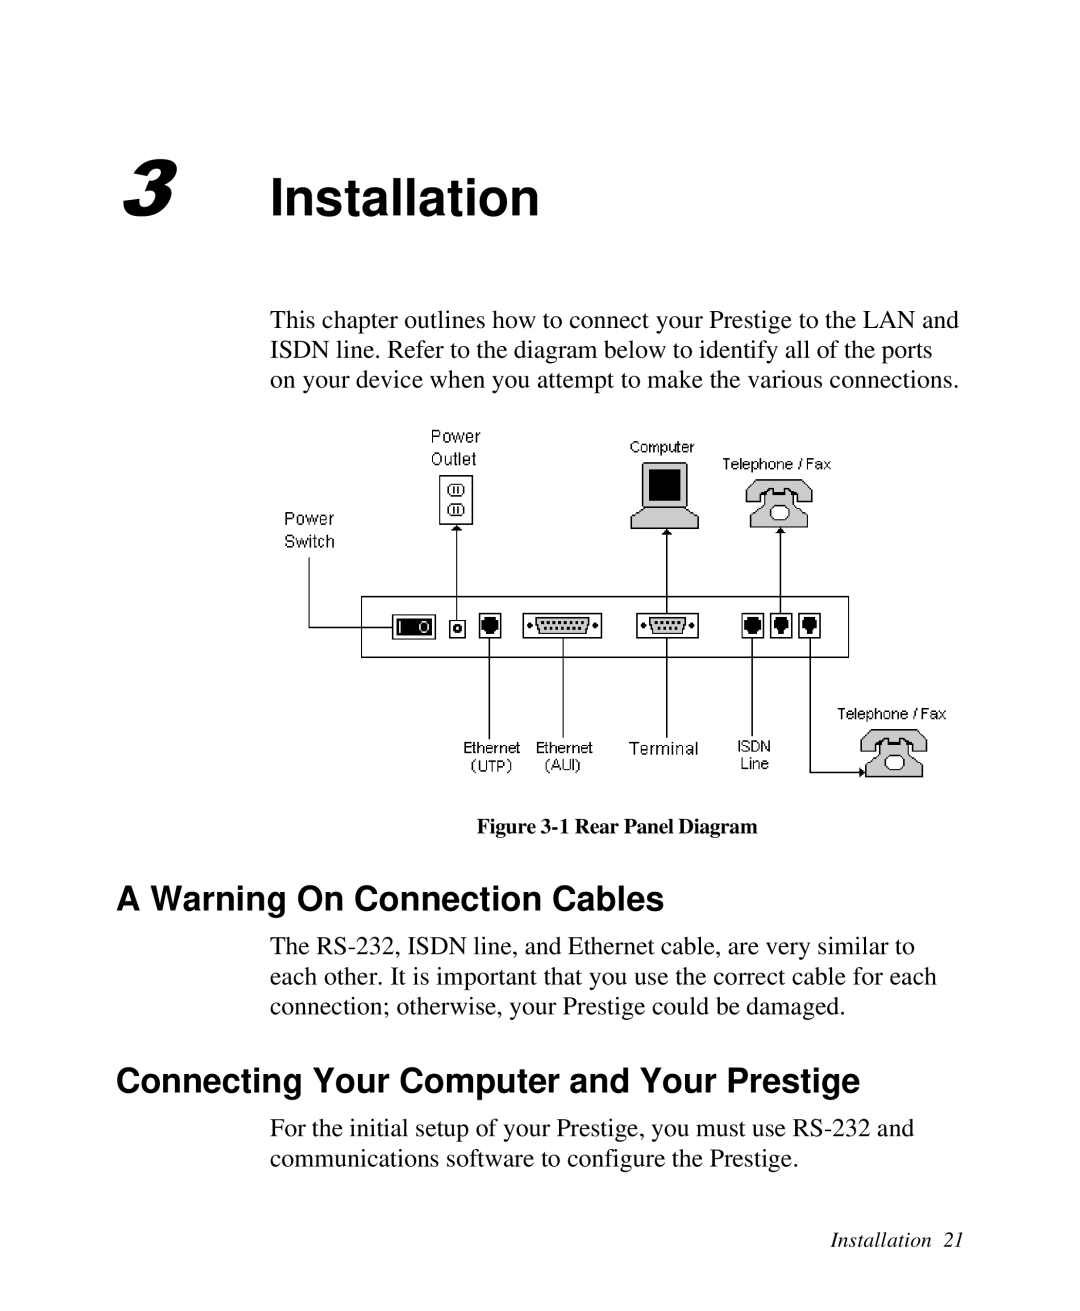 ZyXEL Communications Prestige 128 Installation, A Warning On Connection Cables, Connecting Your Computer and Your Prestige 